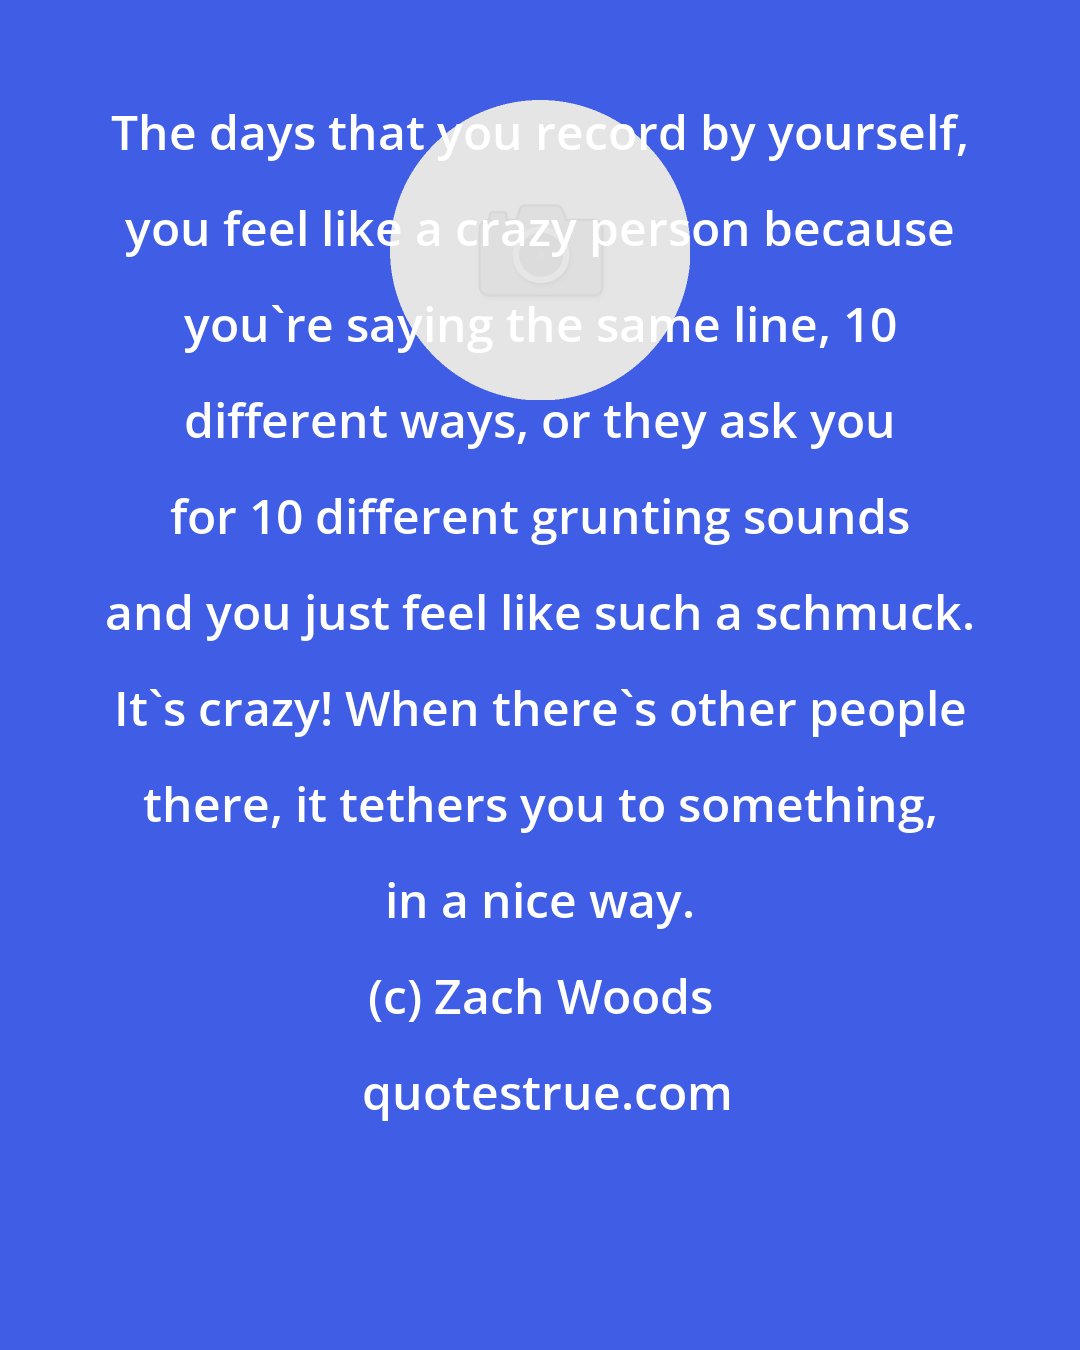 Zach Woods: The days that you record by yourself, you feel like a crazy person because you're saying the same line, 10 different ways, or they ask you for 10 different grunting sounds and you just feel like such a schmuck. It's crazy! When there's other people there, it tethers you to something, in a nice way.